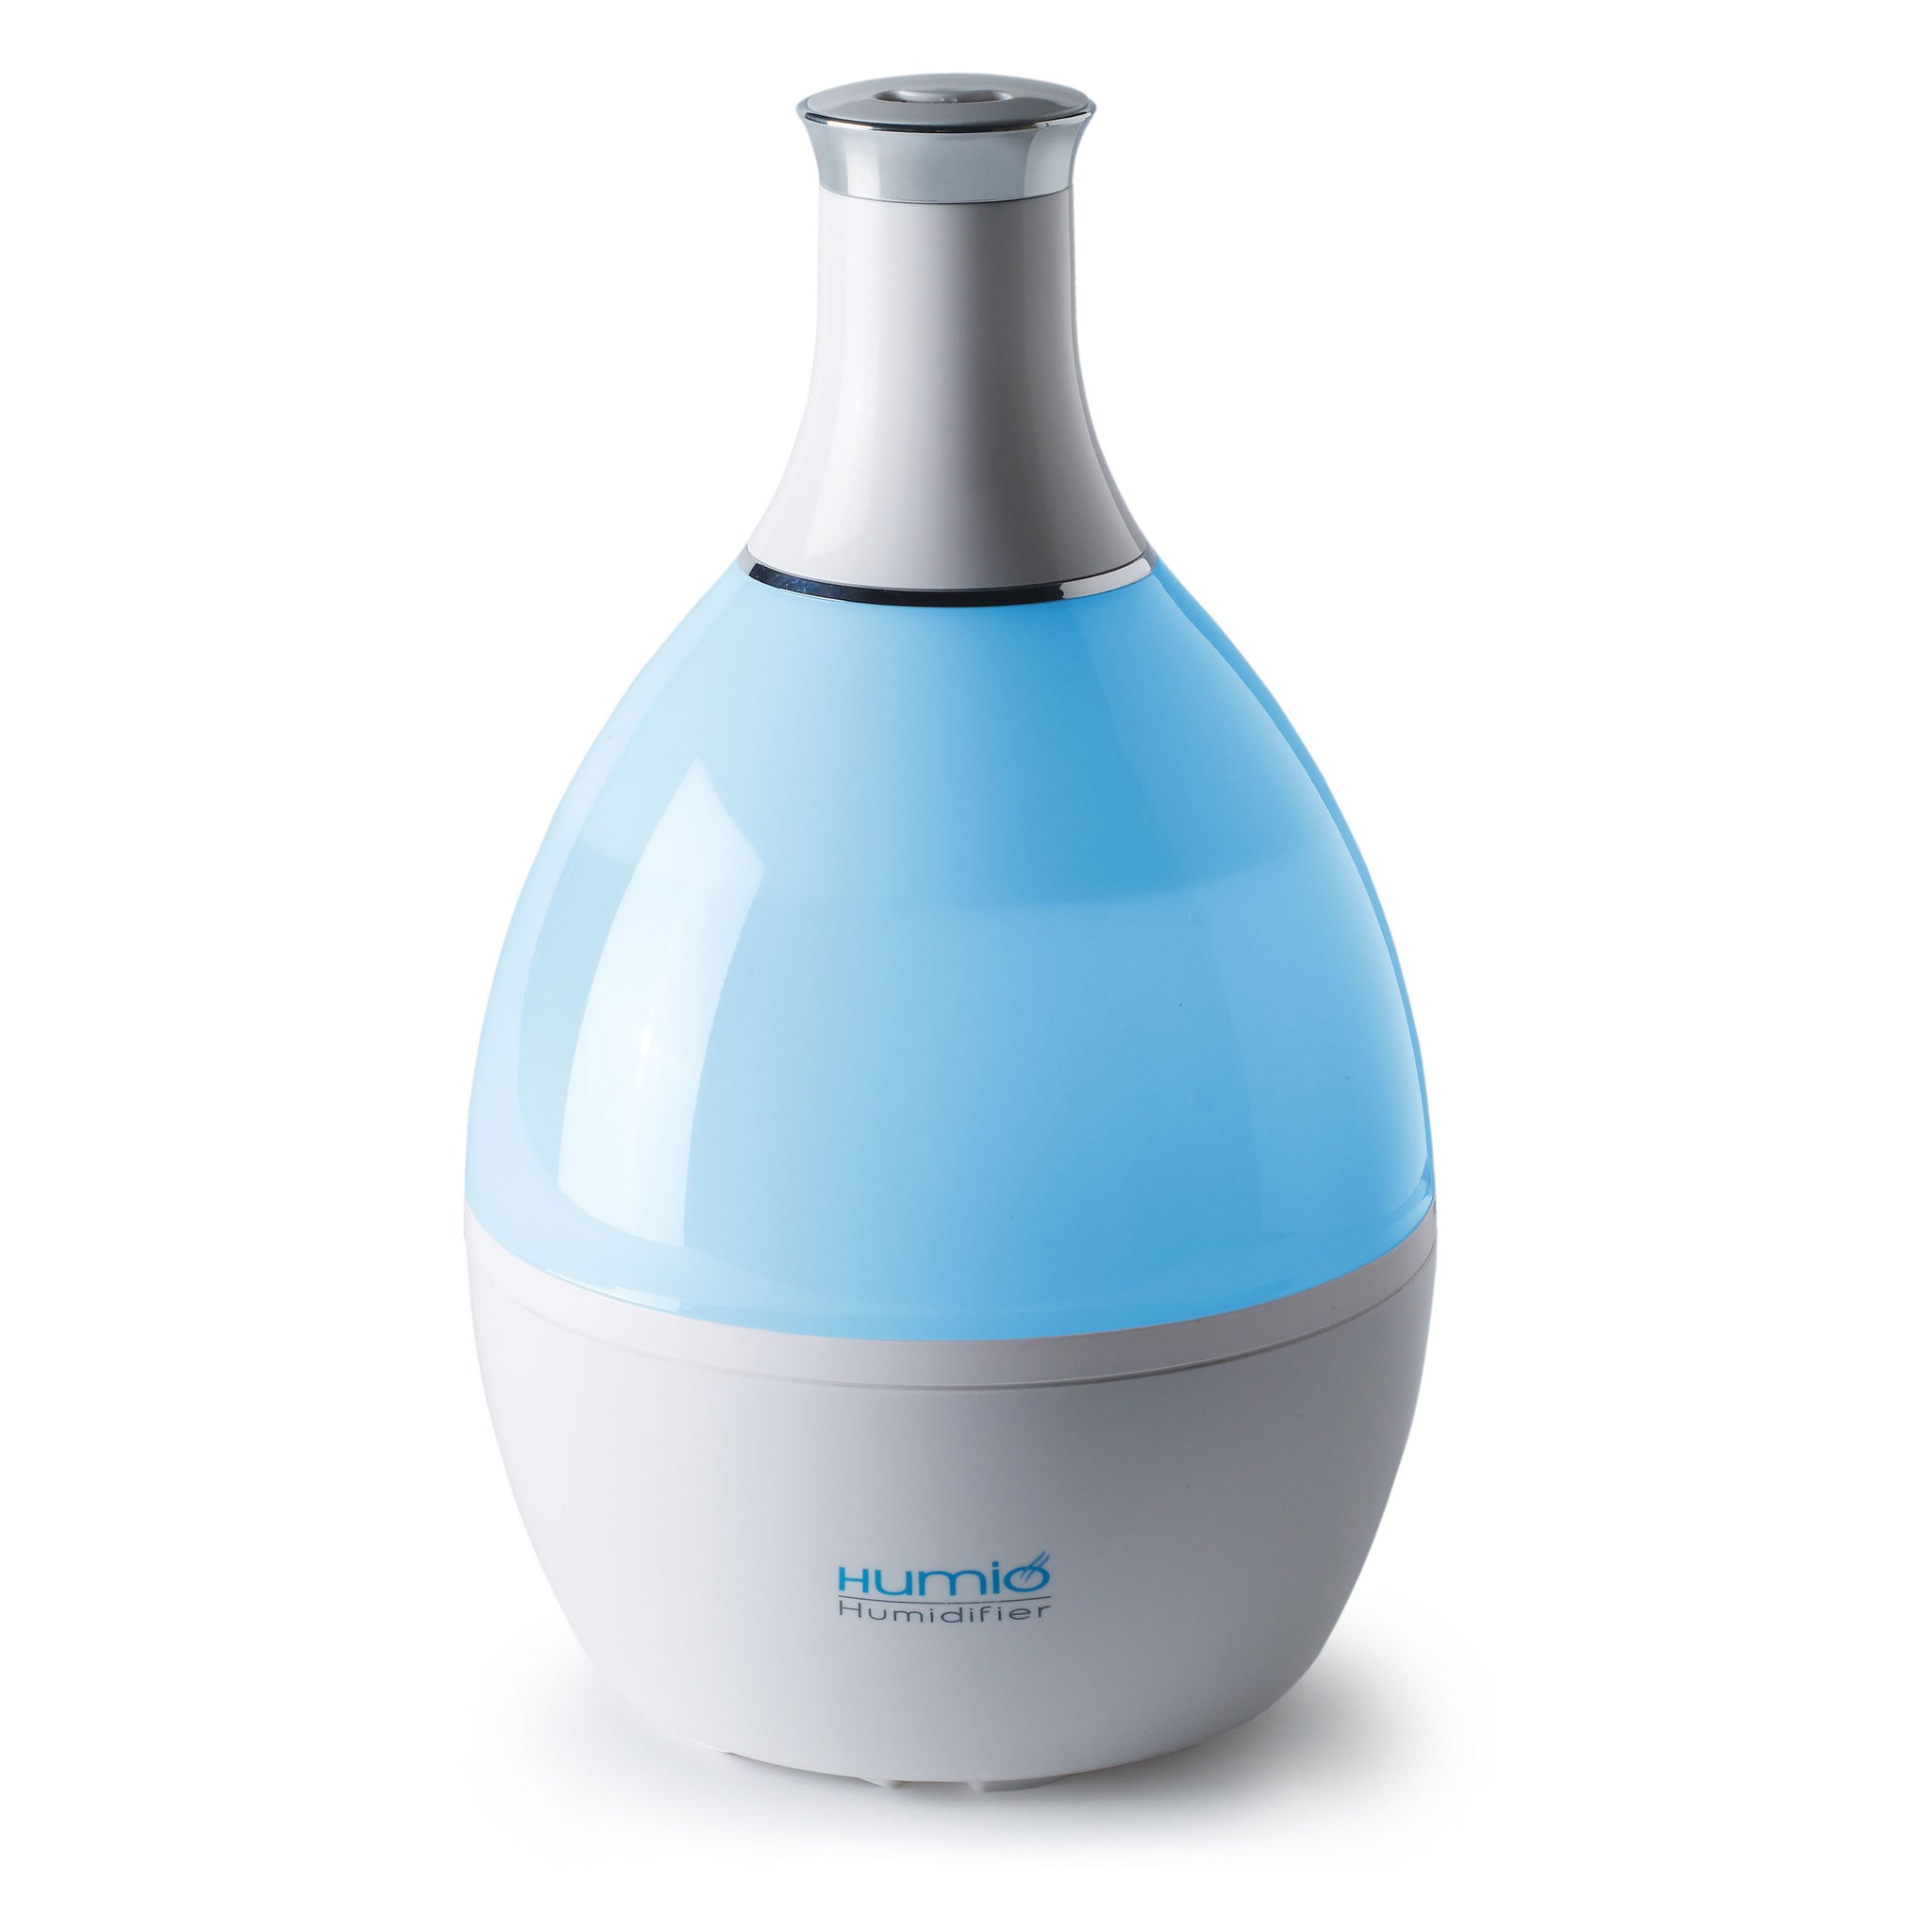 Humio Humidifier & Night Lamp with Aroma Oil Compartment HU-1020-A - Tribest